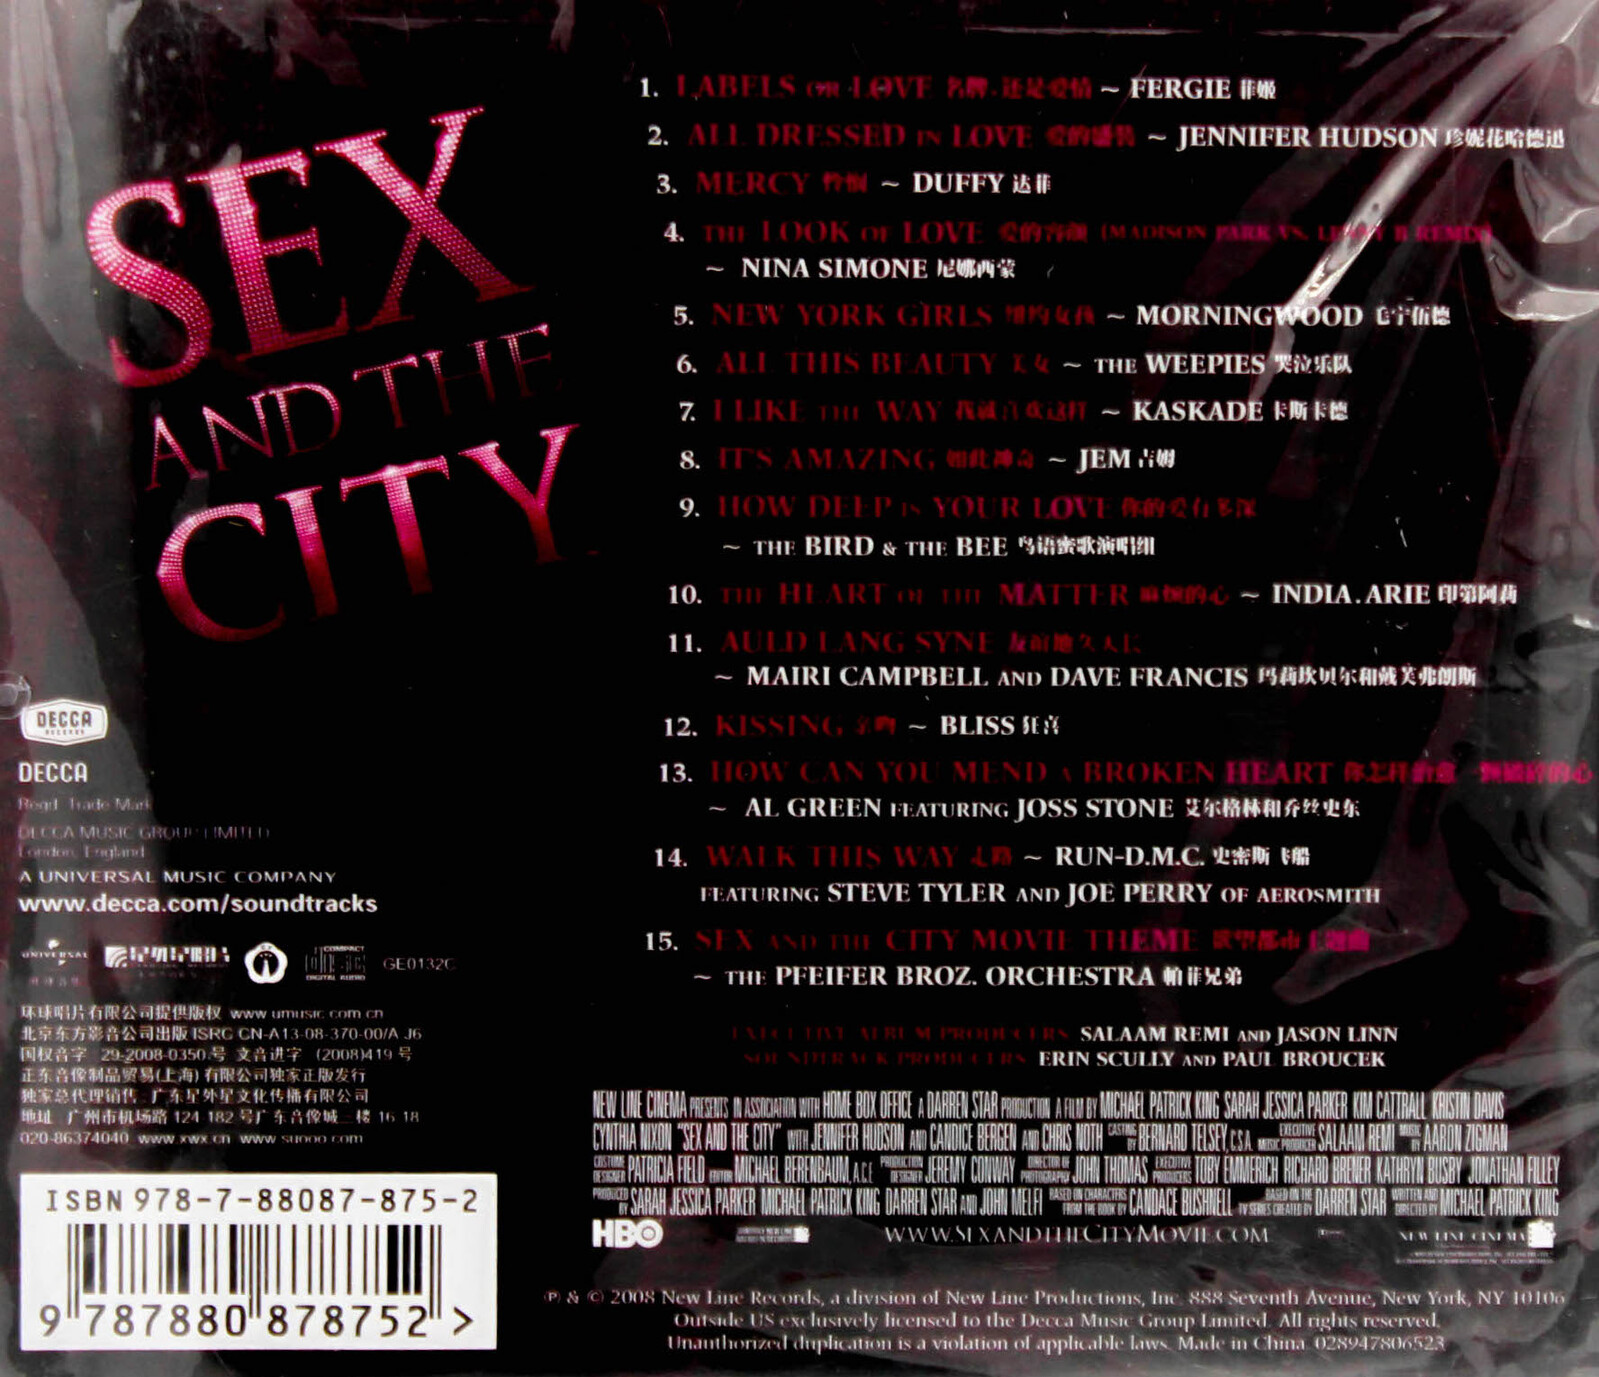 Sex And The City Original Motion Picture Soundtrack Music Cd New Sealed 